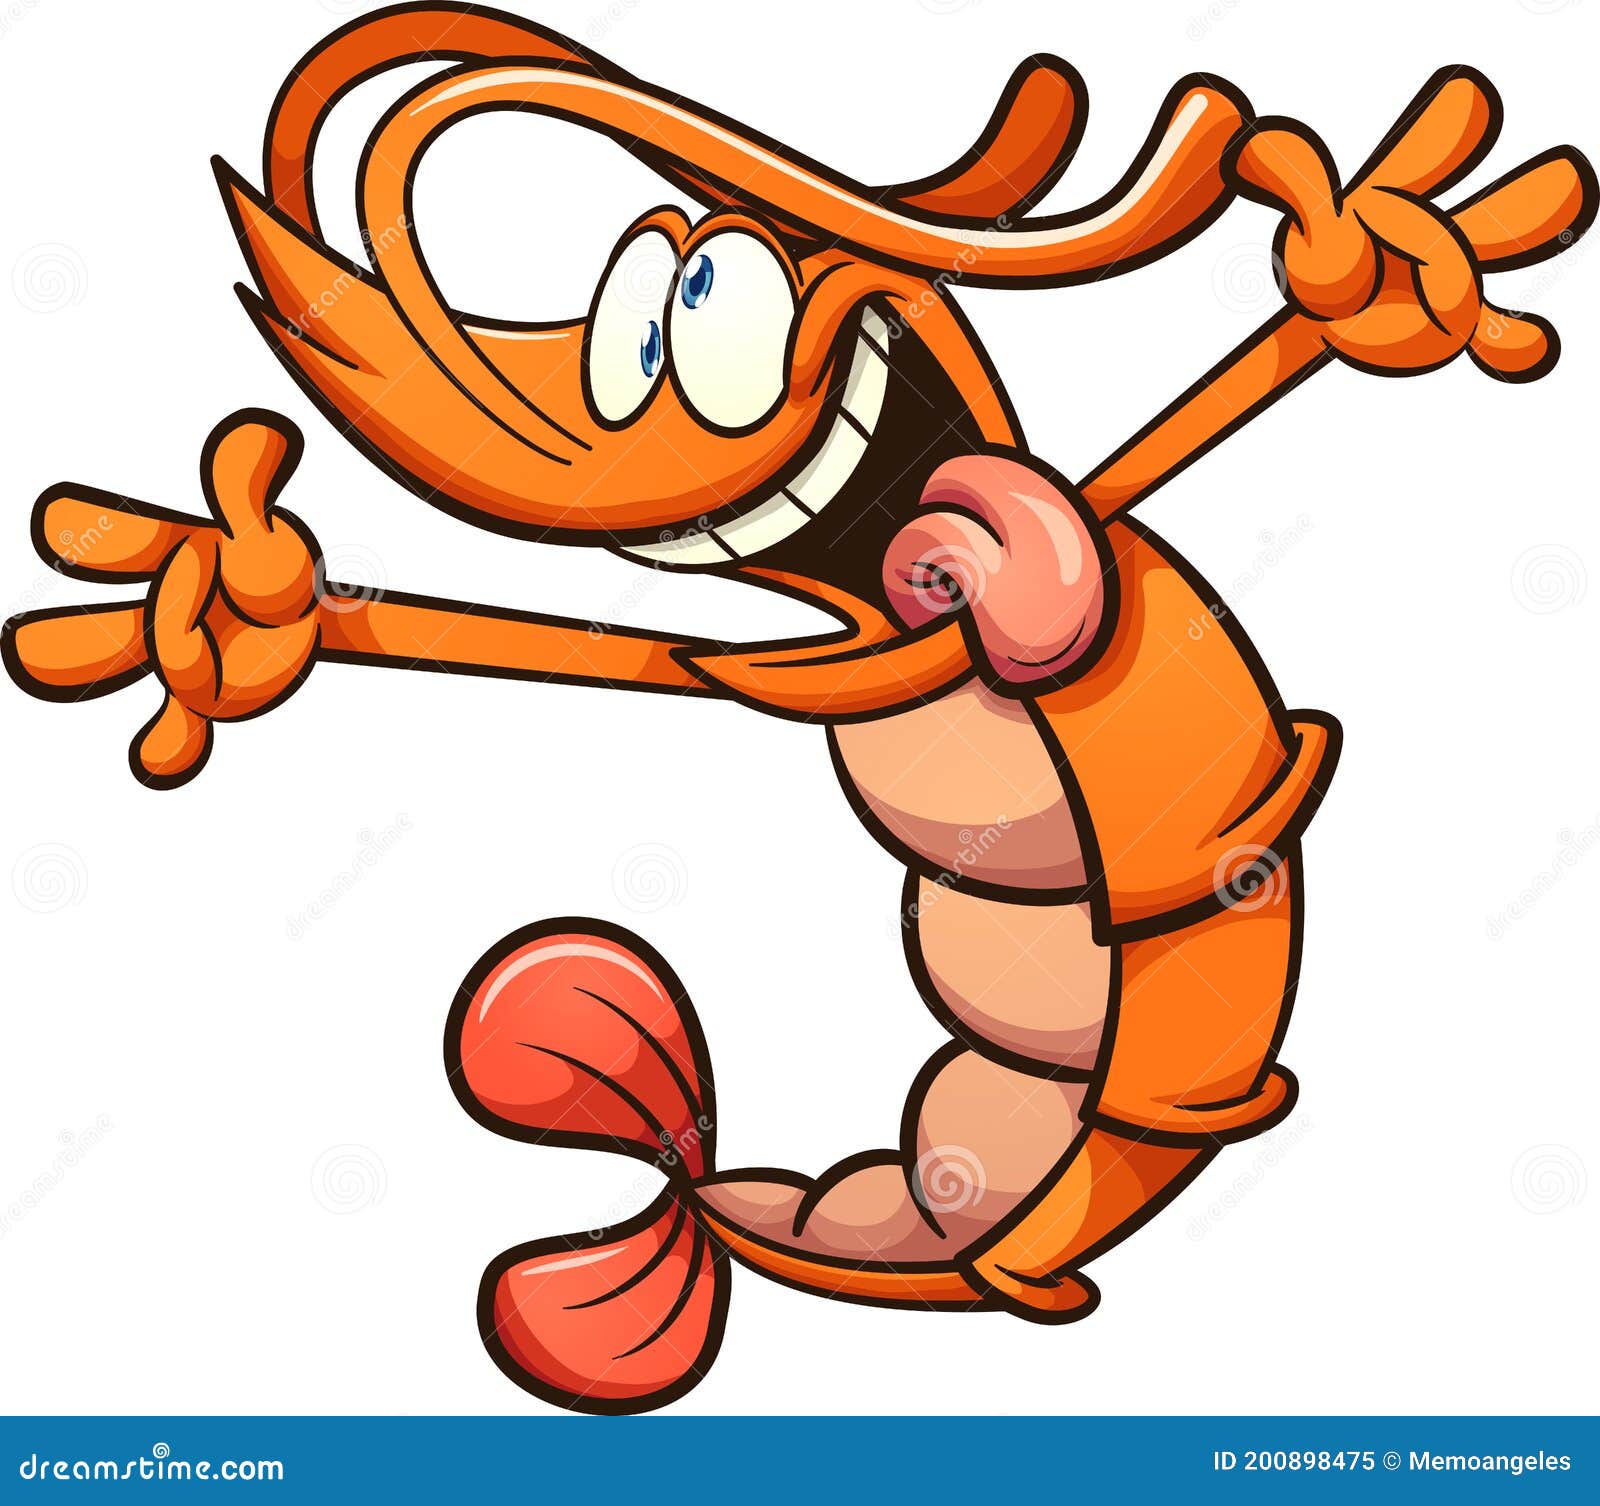 crazy cartoon shrimp with extended arms and tongue out